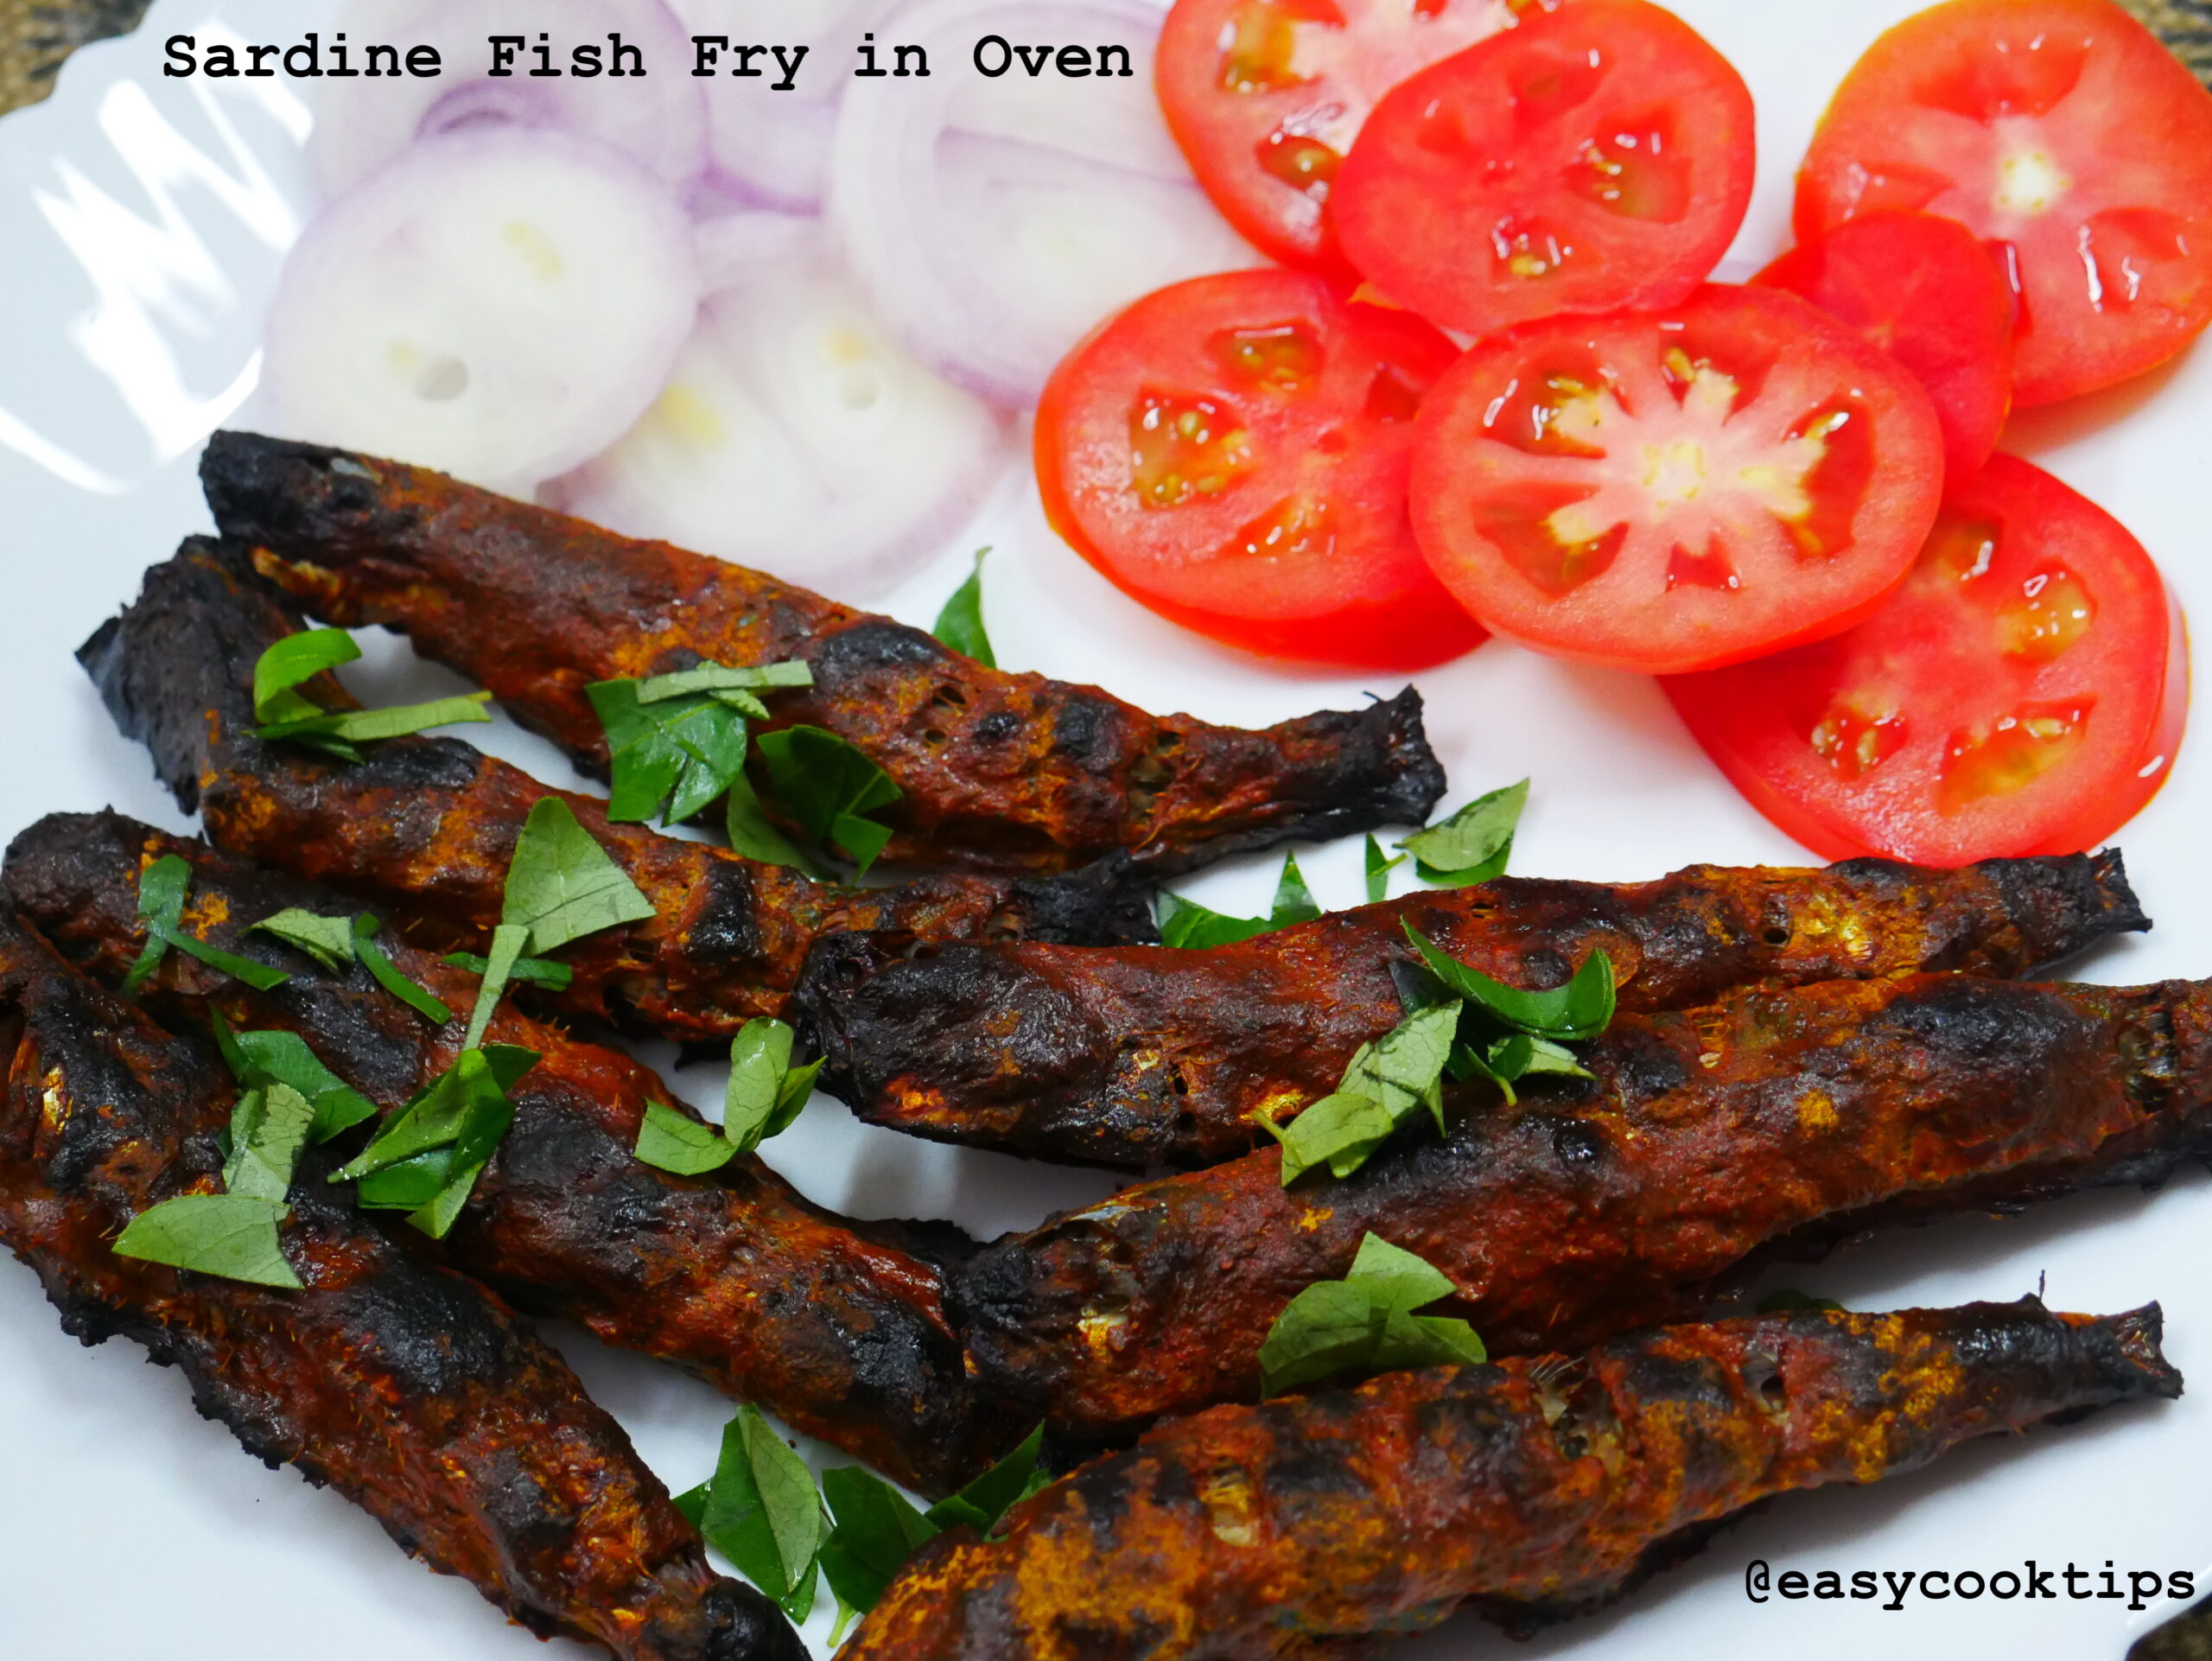 Sardine Fish Fry in Oven Recipe | Fish Fry Recipe without Oil